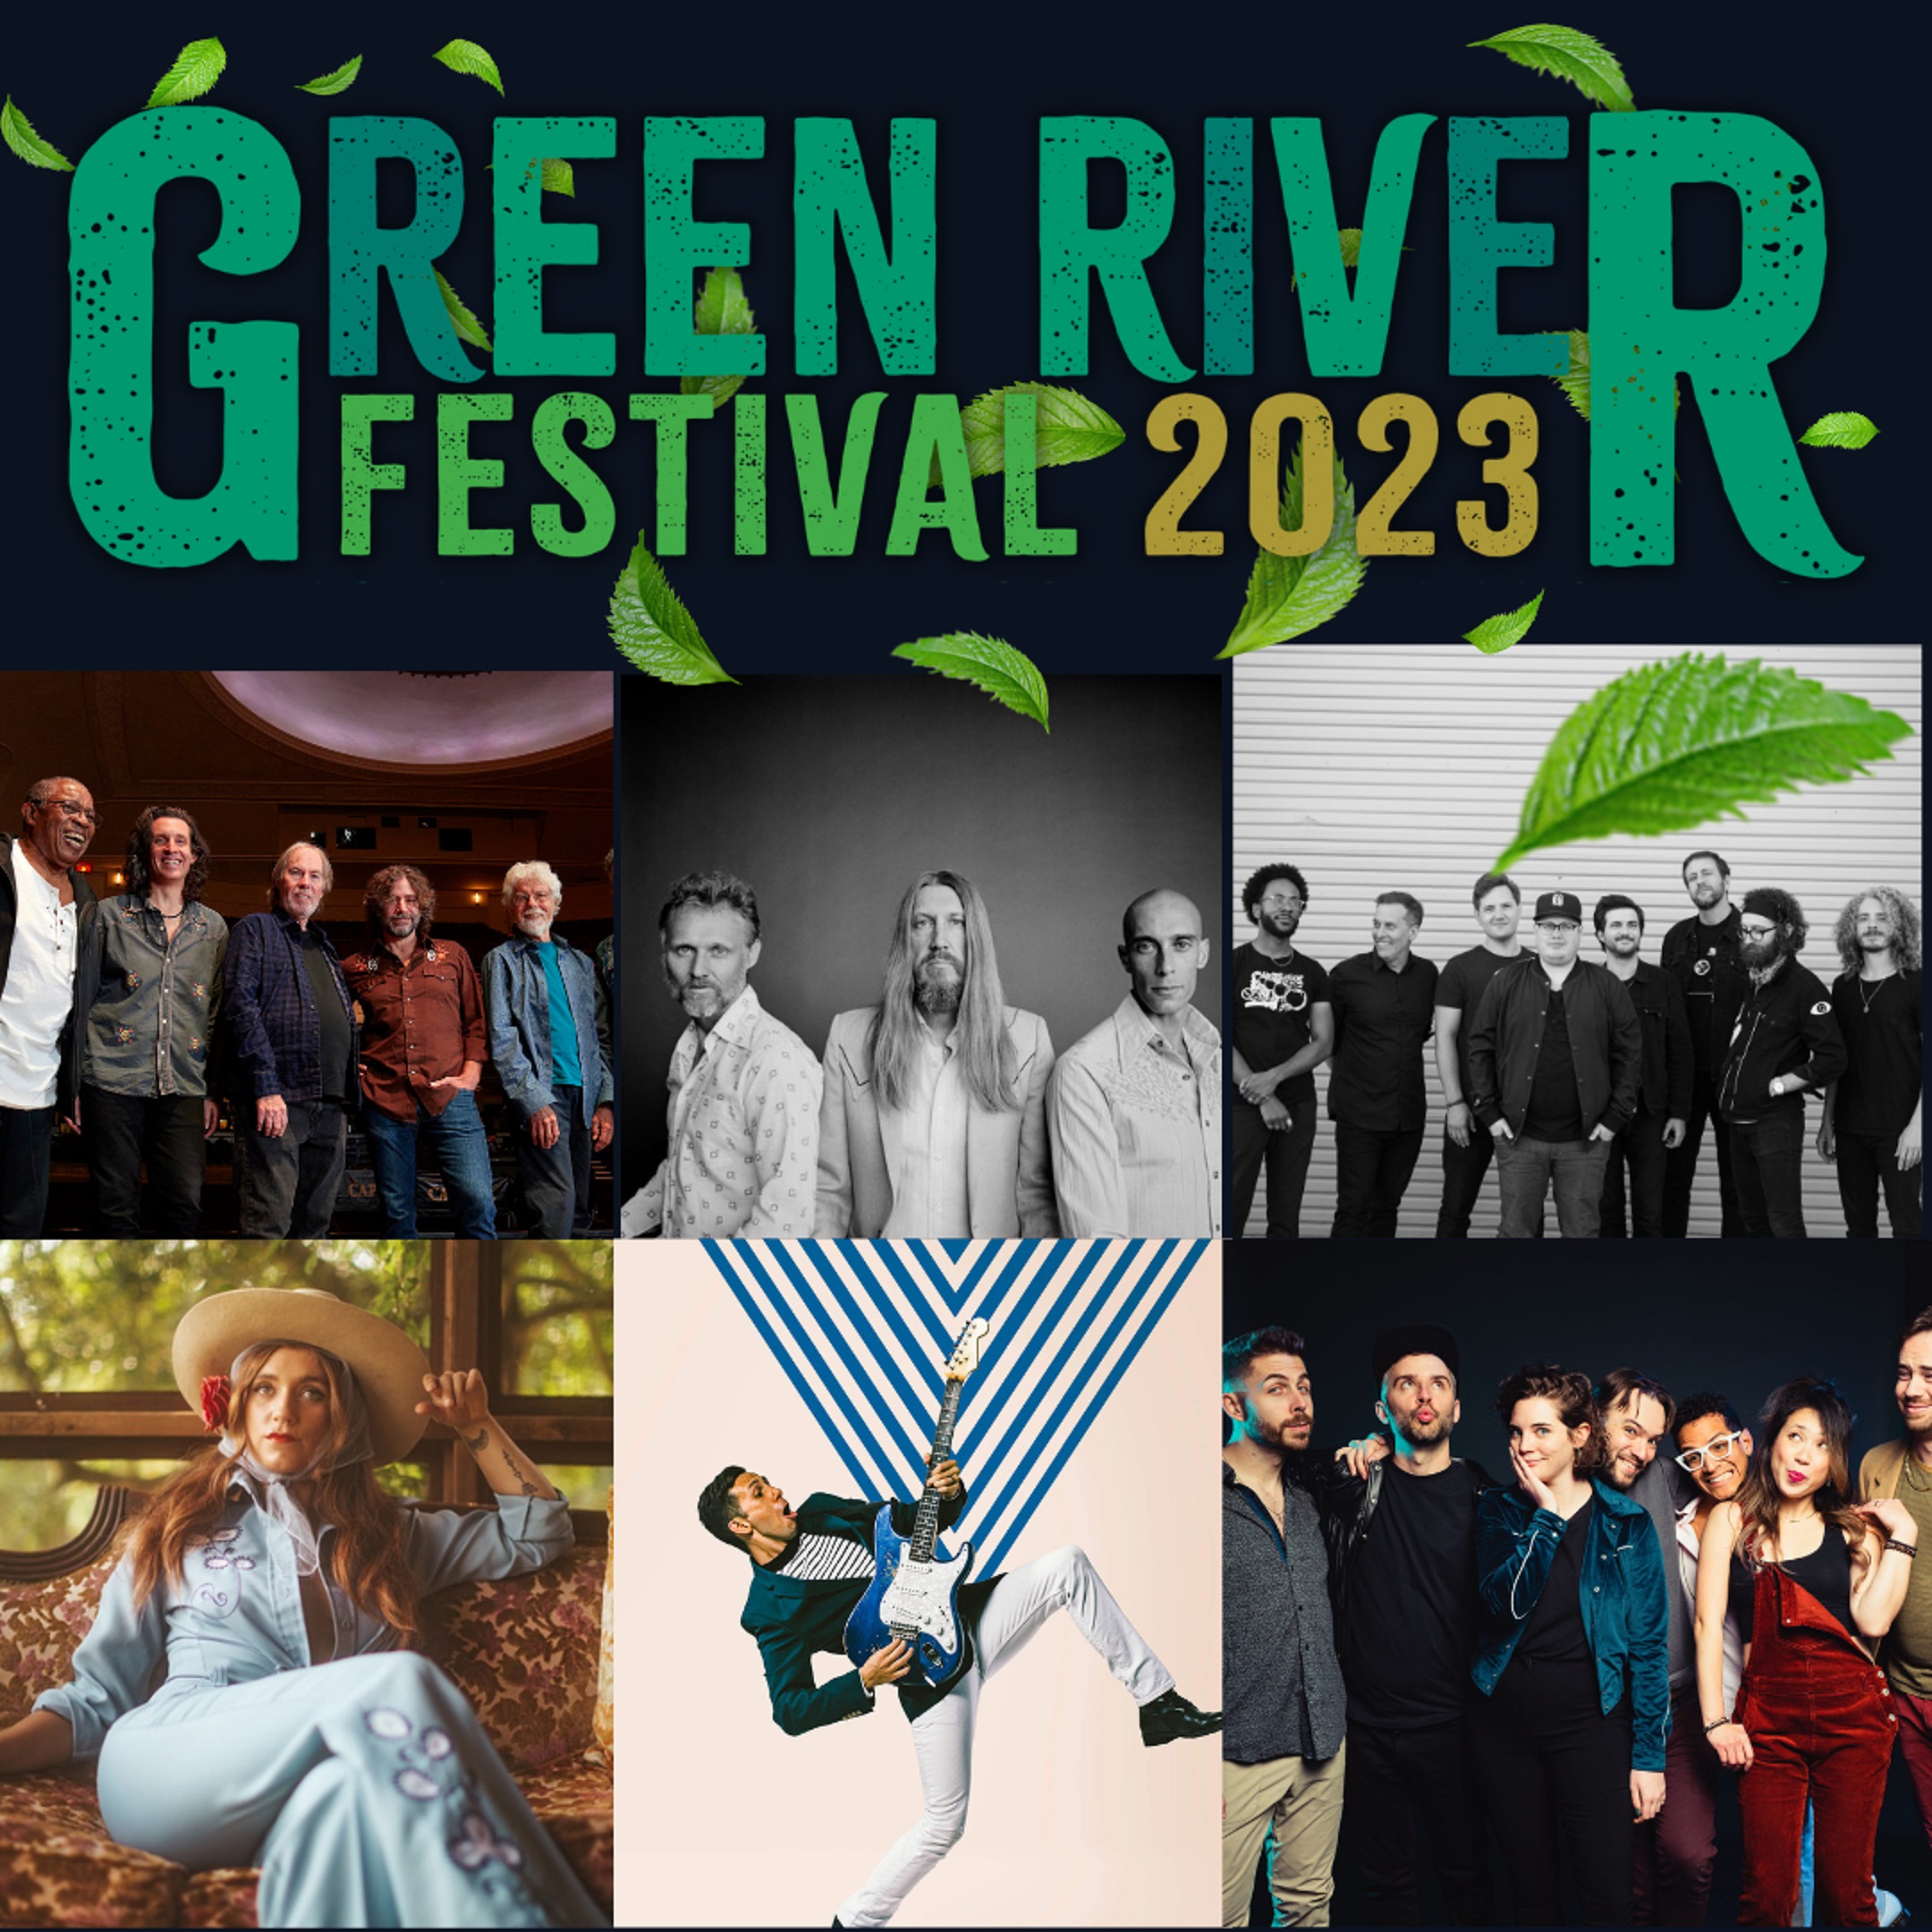 GREEN RIVER FESTIVAL ANNOUNCES LITTLE FEAT, THE WOOD BROTHERS, SIERRA FERRELL, SAMMY RAE & THE FRIENDS, CORY WONG, AND MORE